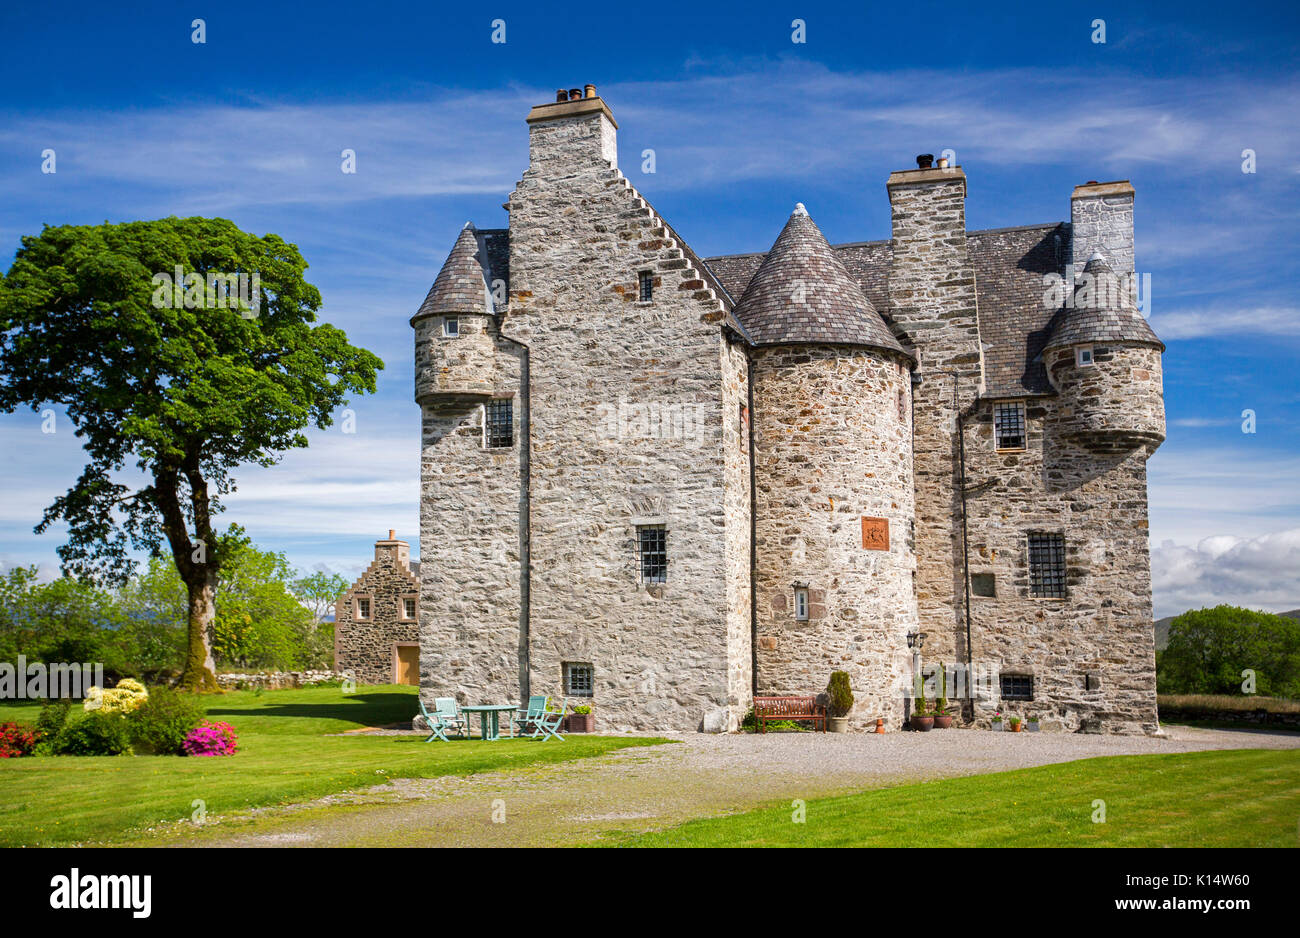 Stunning view of 17th century Barcaldine castle, now a B & B / hotel accommodation surrounded by colourful  gardens under blue sky in Scotland Stock Photo